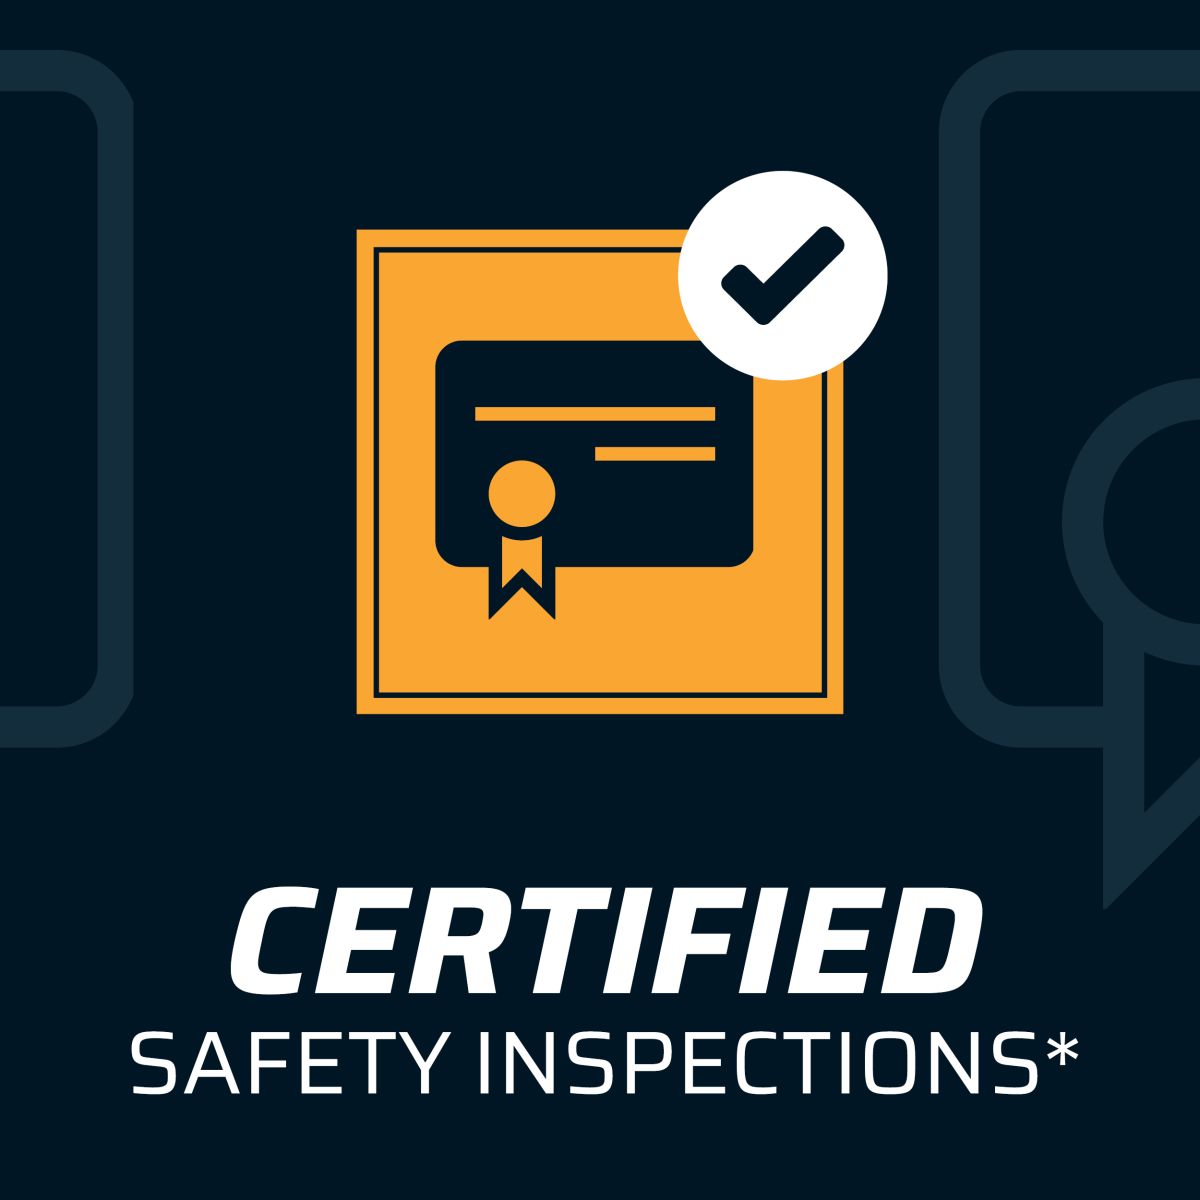 Certified Safety Inspections*